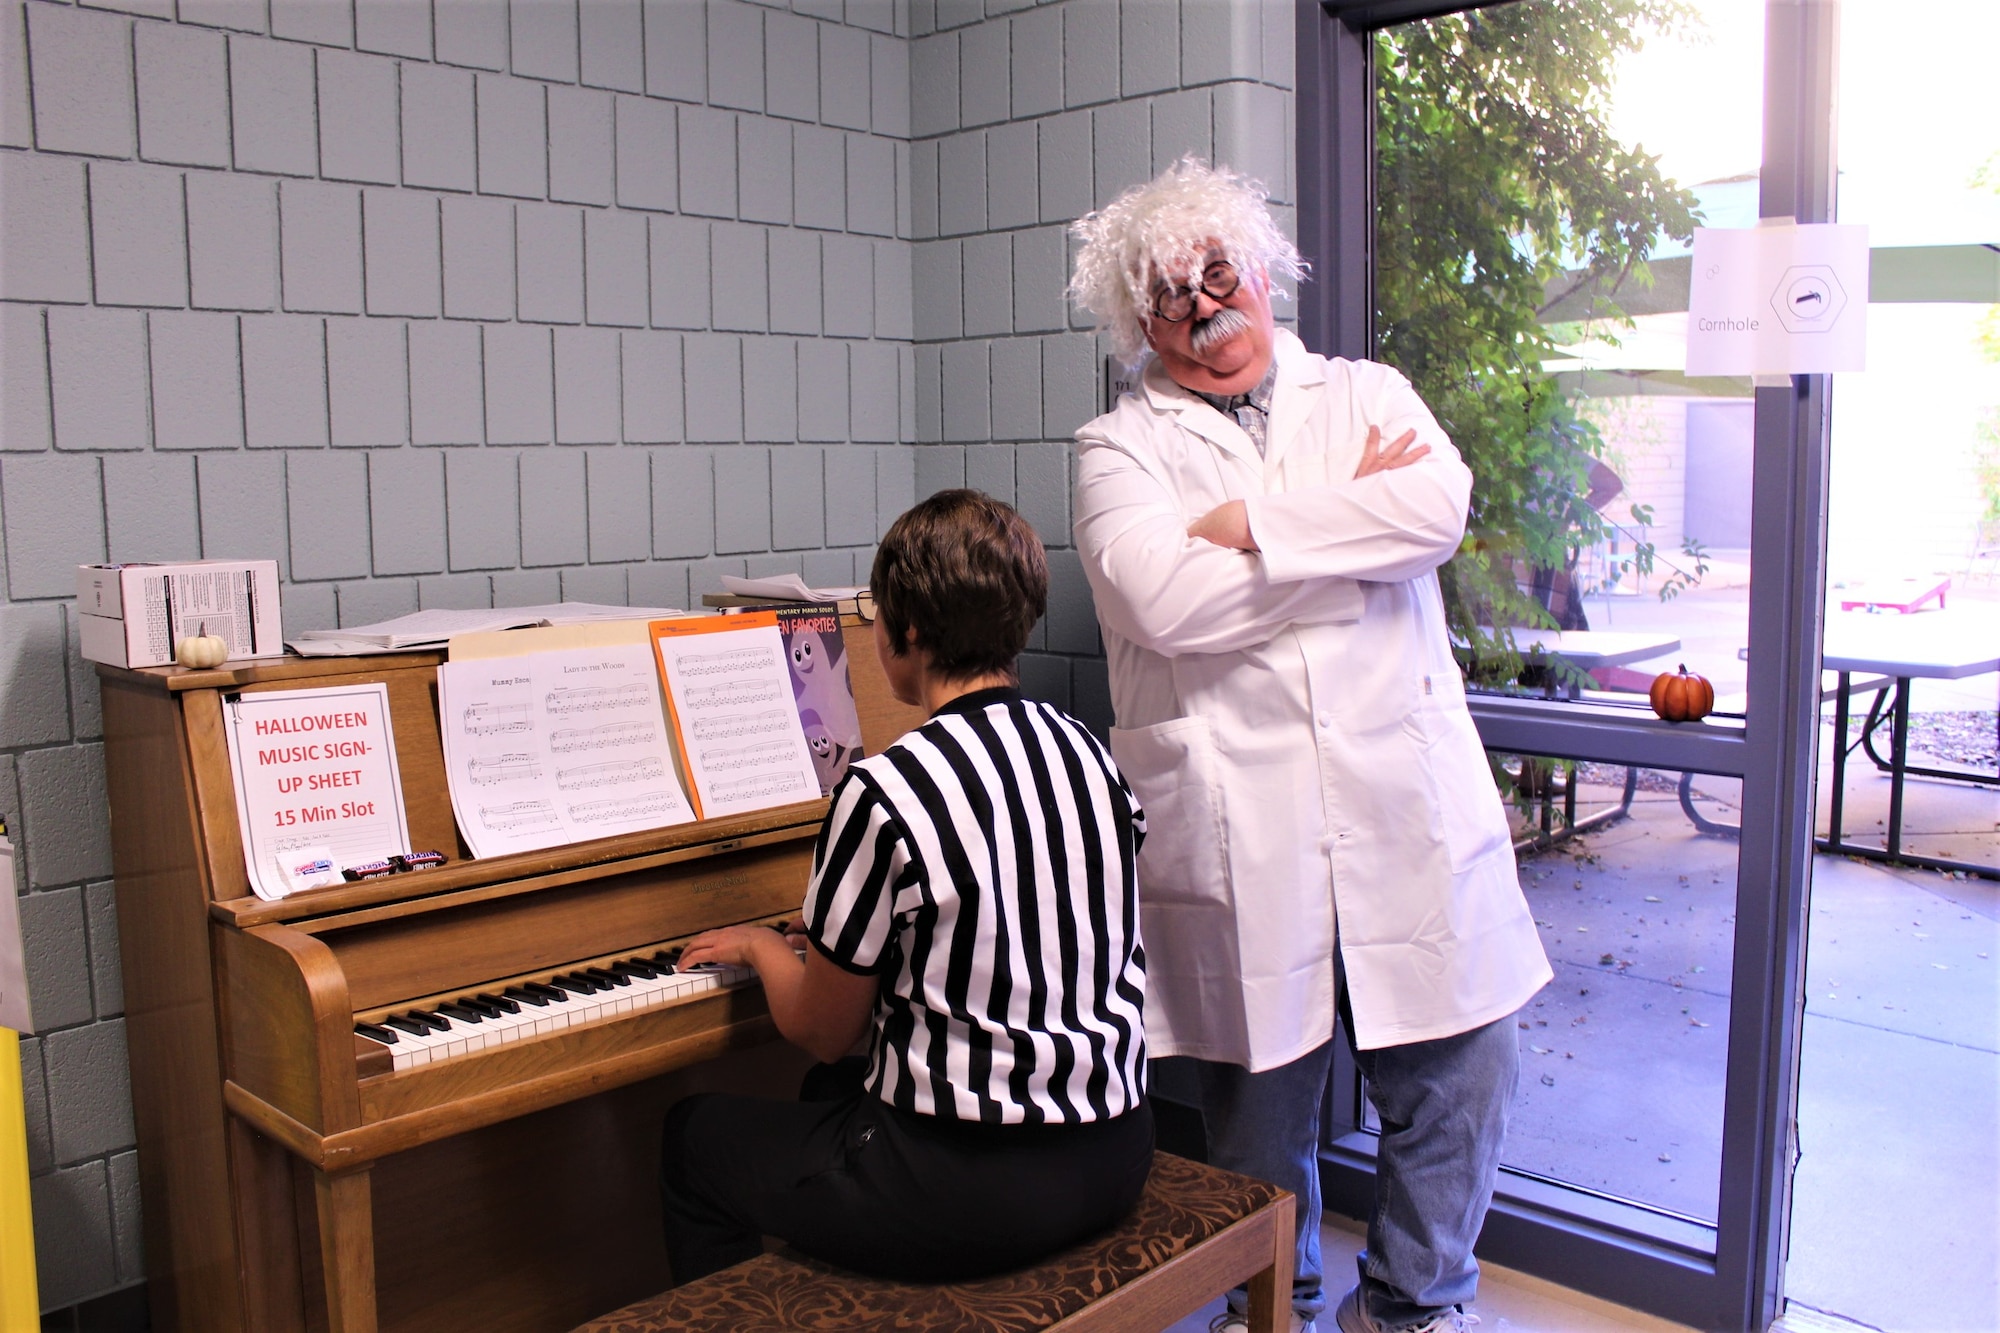 lady plays piano while a man stands nearby in a scientist costume